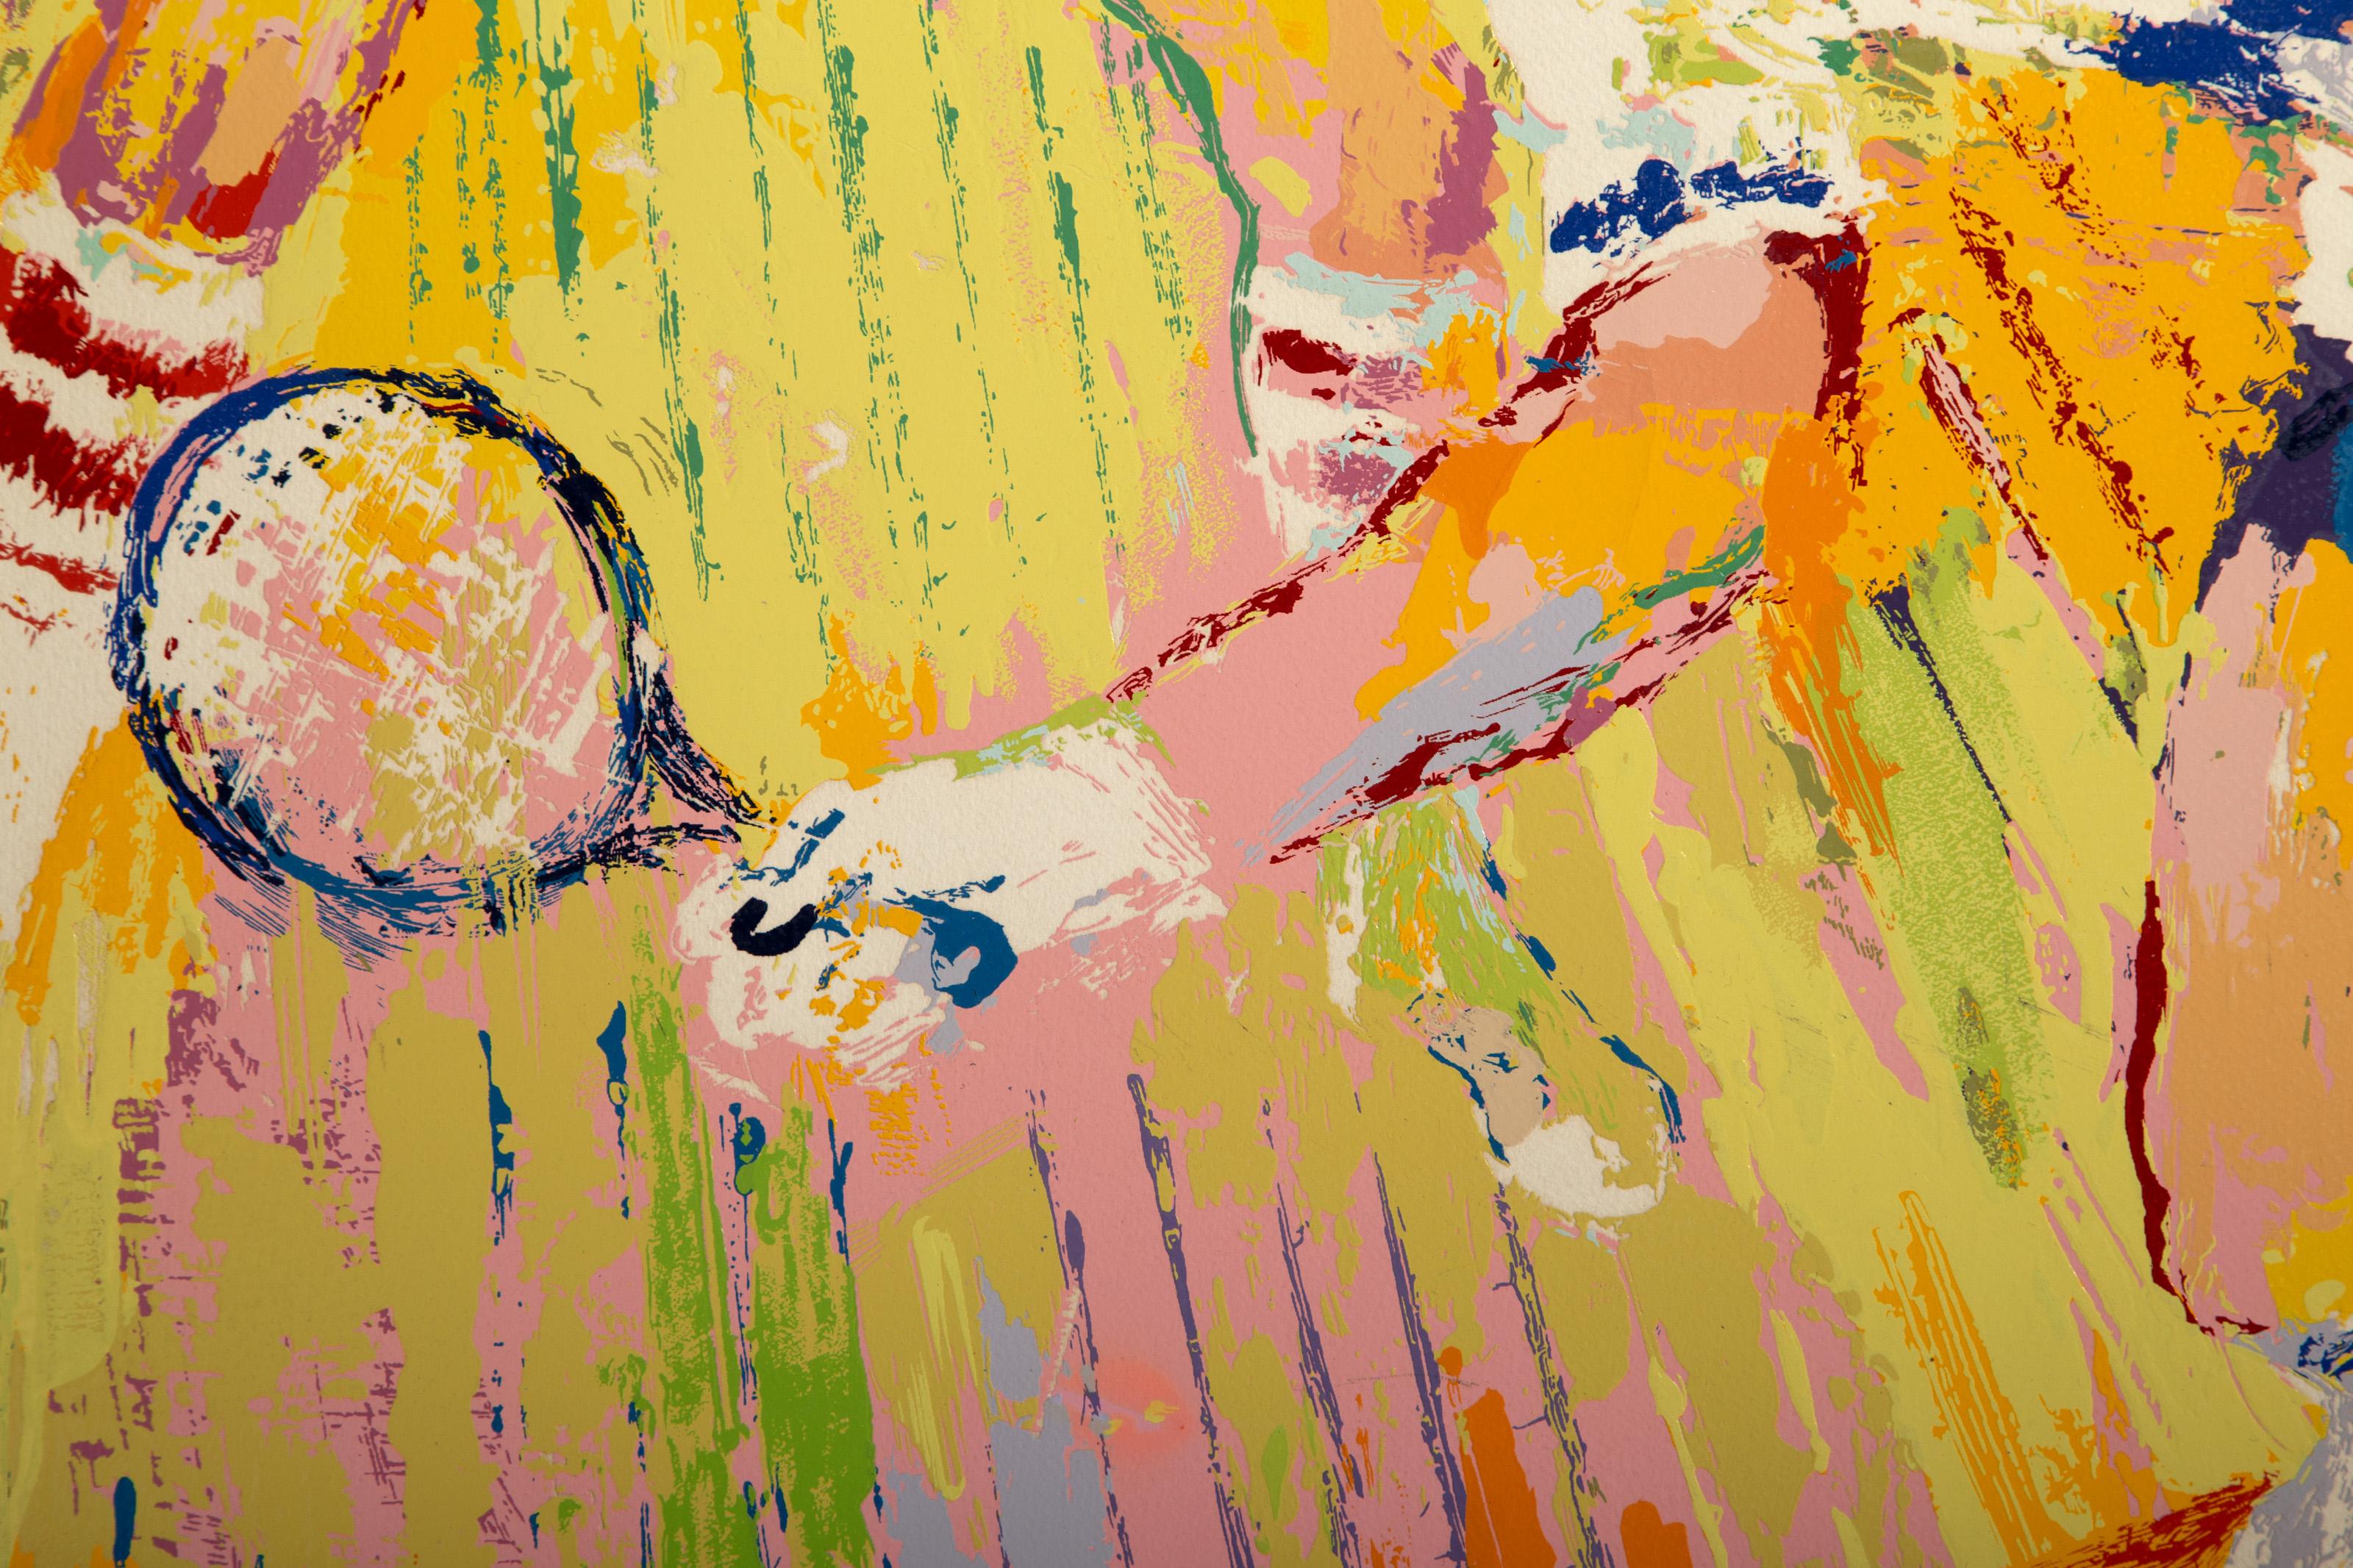 LeRoy Neiman, American (1921 - 2012) -  Racquetball. Medium: Screenprint, signed and numbered in pencil, Edition: 109/500, Image Size: 37 x 29.5 inches, Size: 43 x 35.5 in. (109.22 x 90.17 cm) 